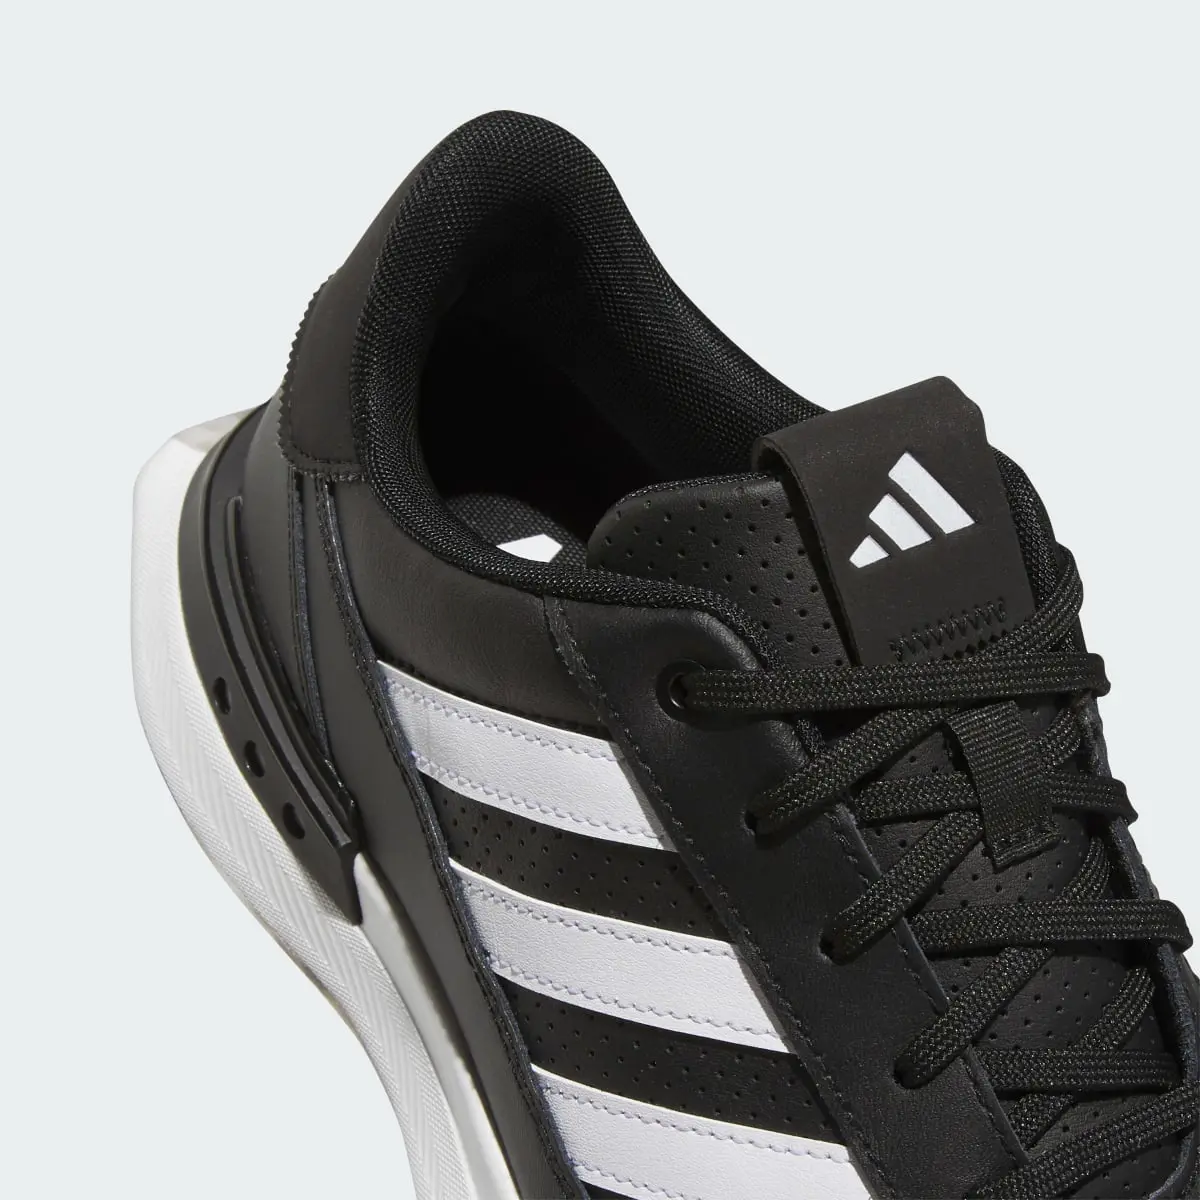 Adidas S2G 24 Golf Shoes. 3